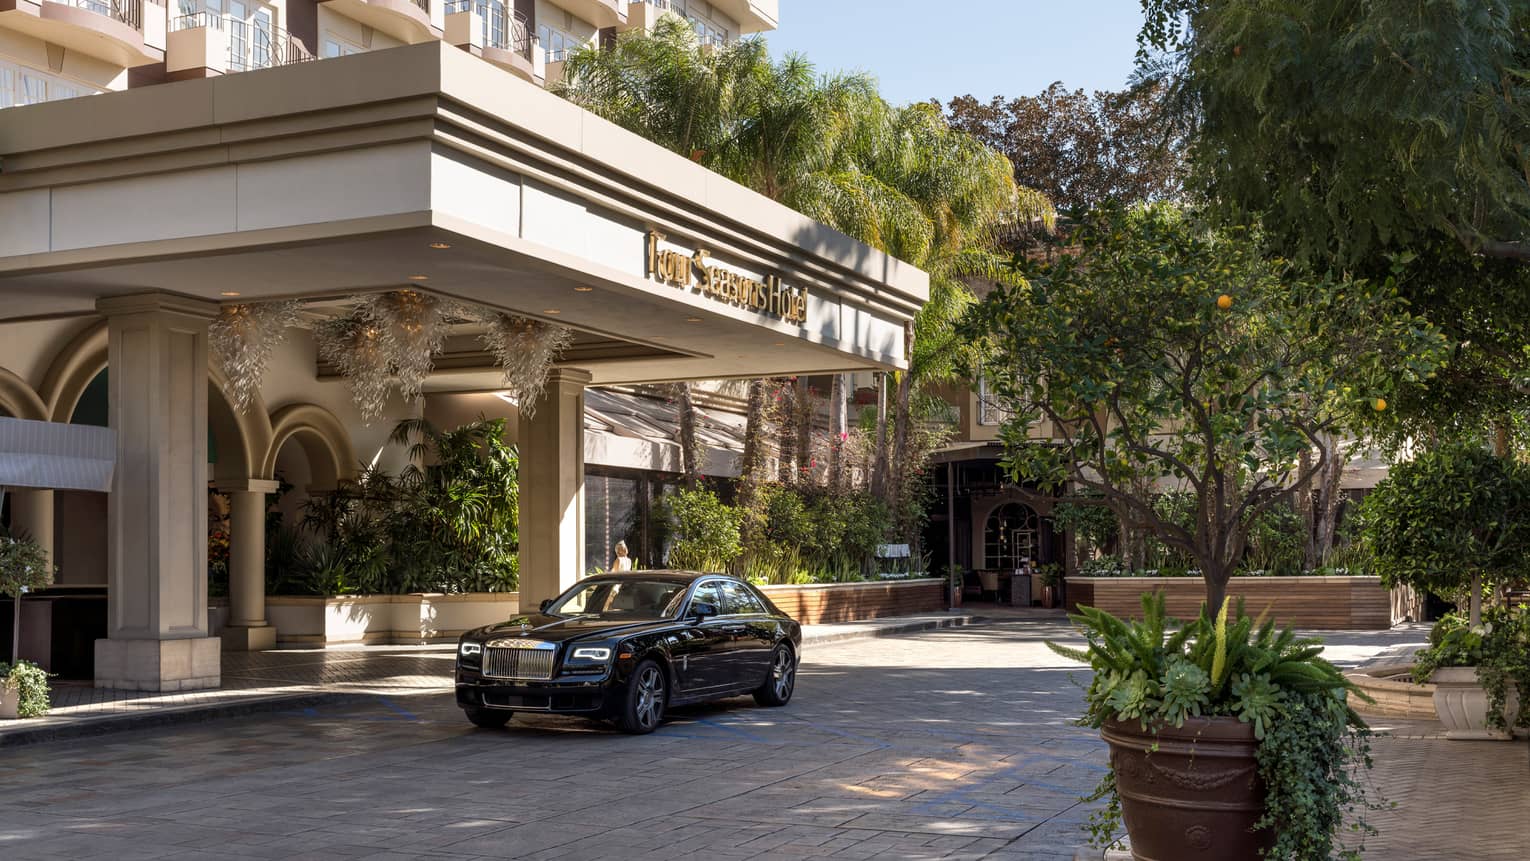 The exterior of a hotel with a car parked outside of its entrance on a driveway.